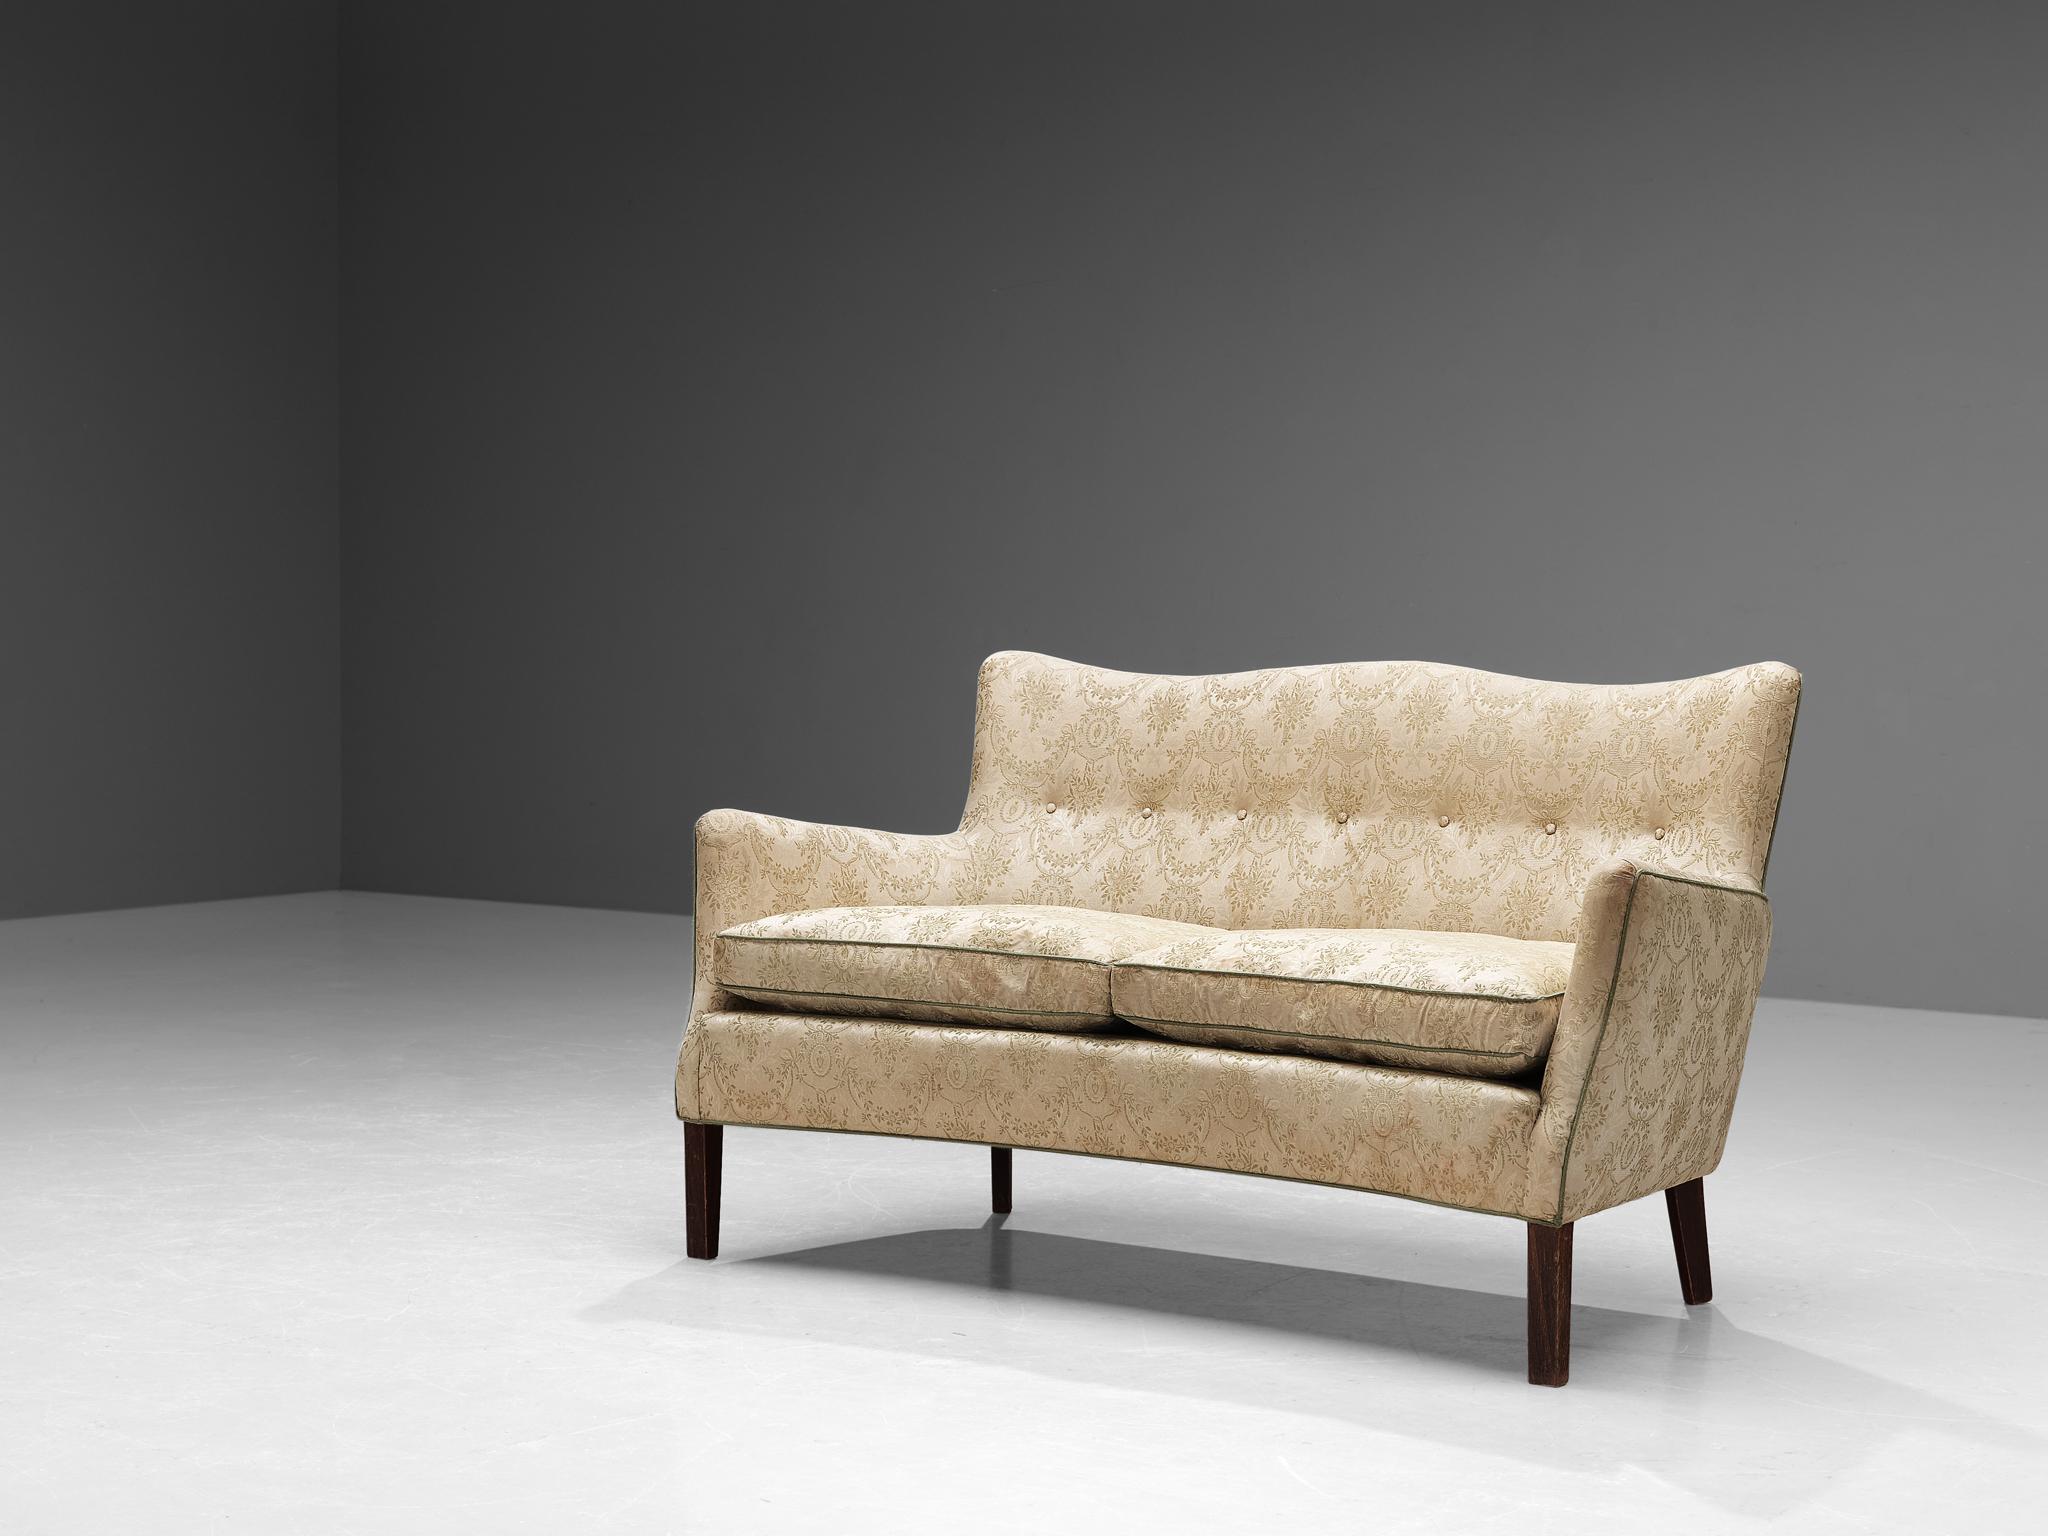 Sofa, fabric, wood, Denmark, 1950s.

This sofa has all the flair and vitality of a typical Danish mid-century furniture piece. This particular design invites you to spend more time on it due to its imposing, high backrest which is slightly tilted. A